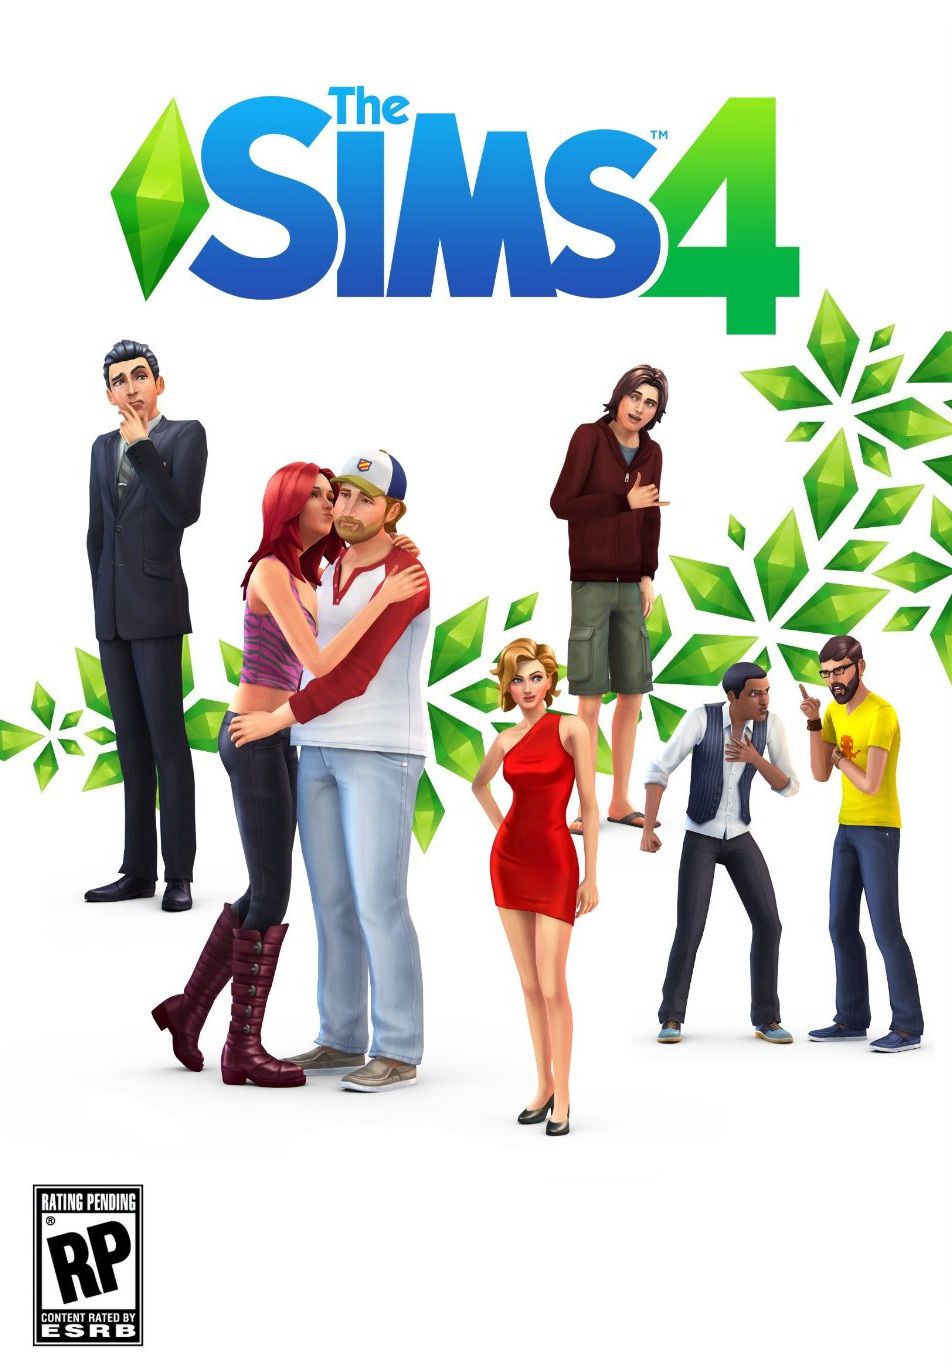 The Sims 4 – RELOADED (2014)